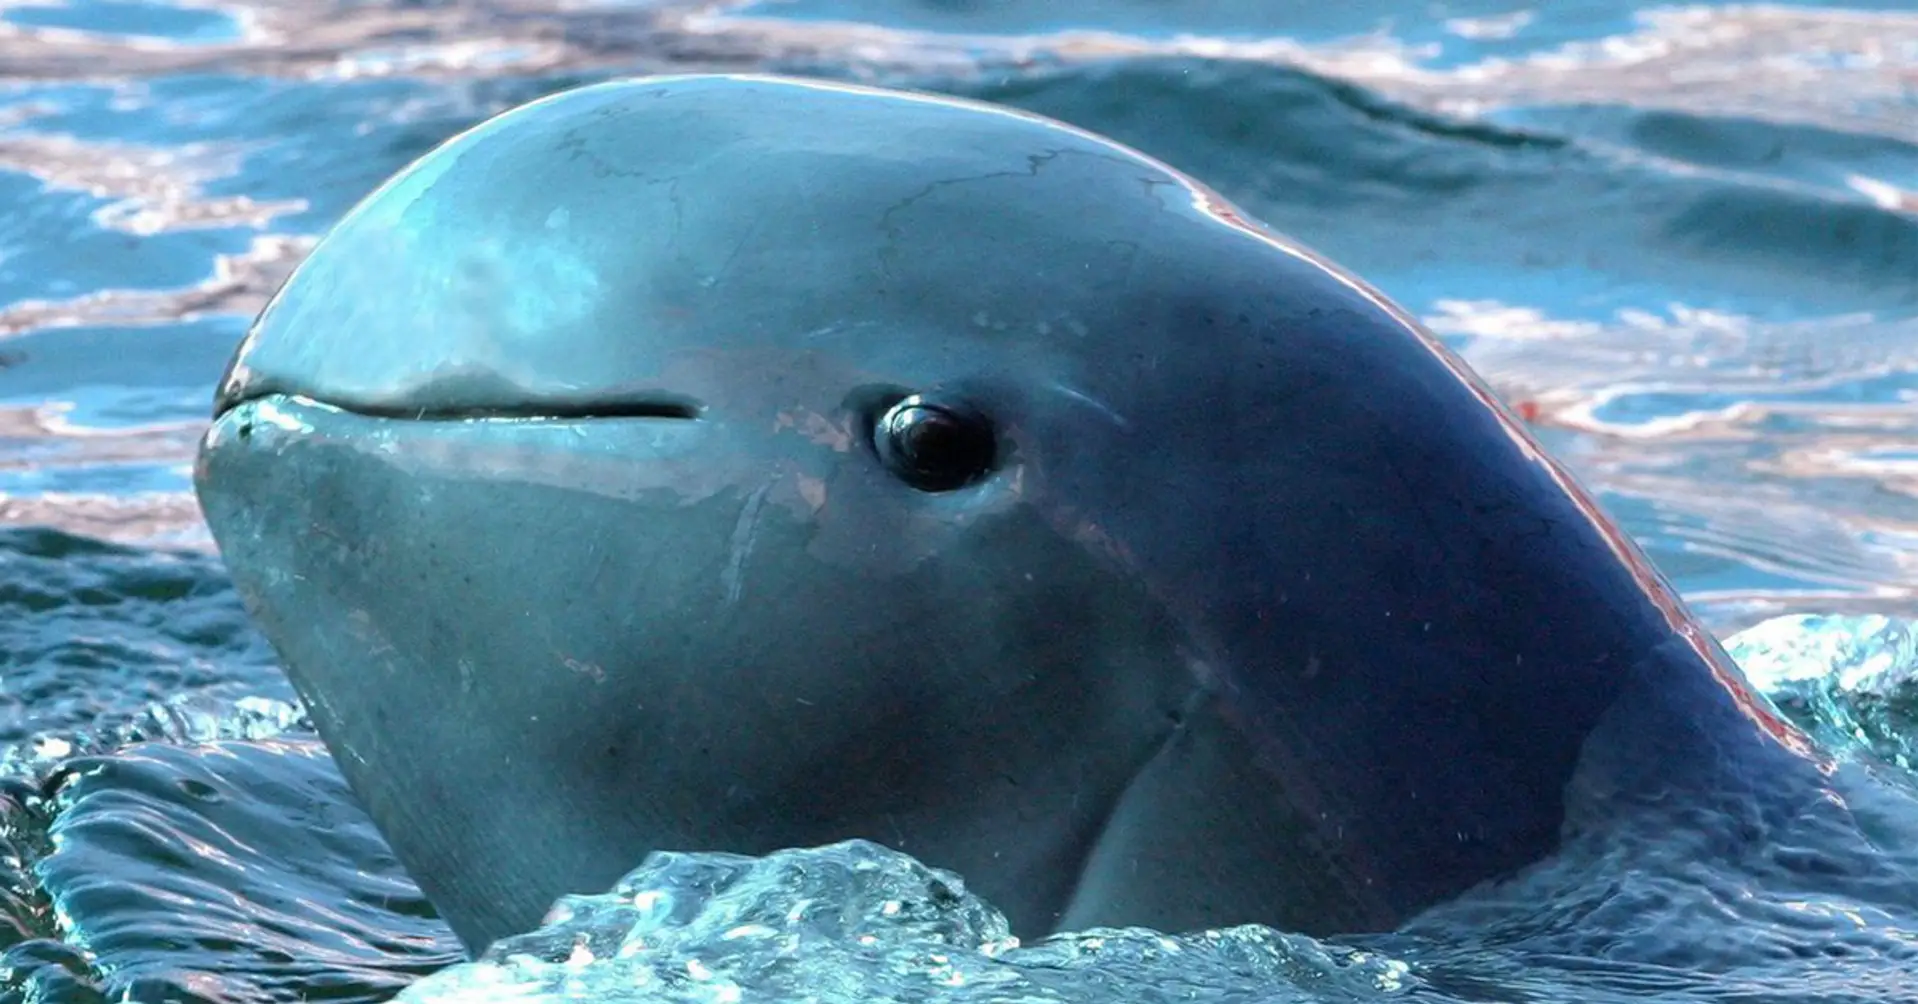 Incredibly rare Irrawaddy dolphins found and captured on camera in Indonesia [2 photos]